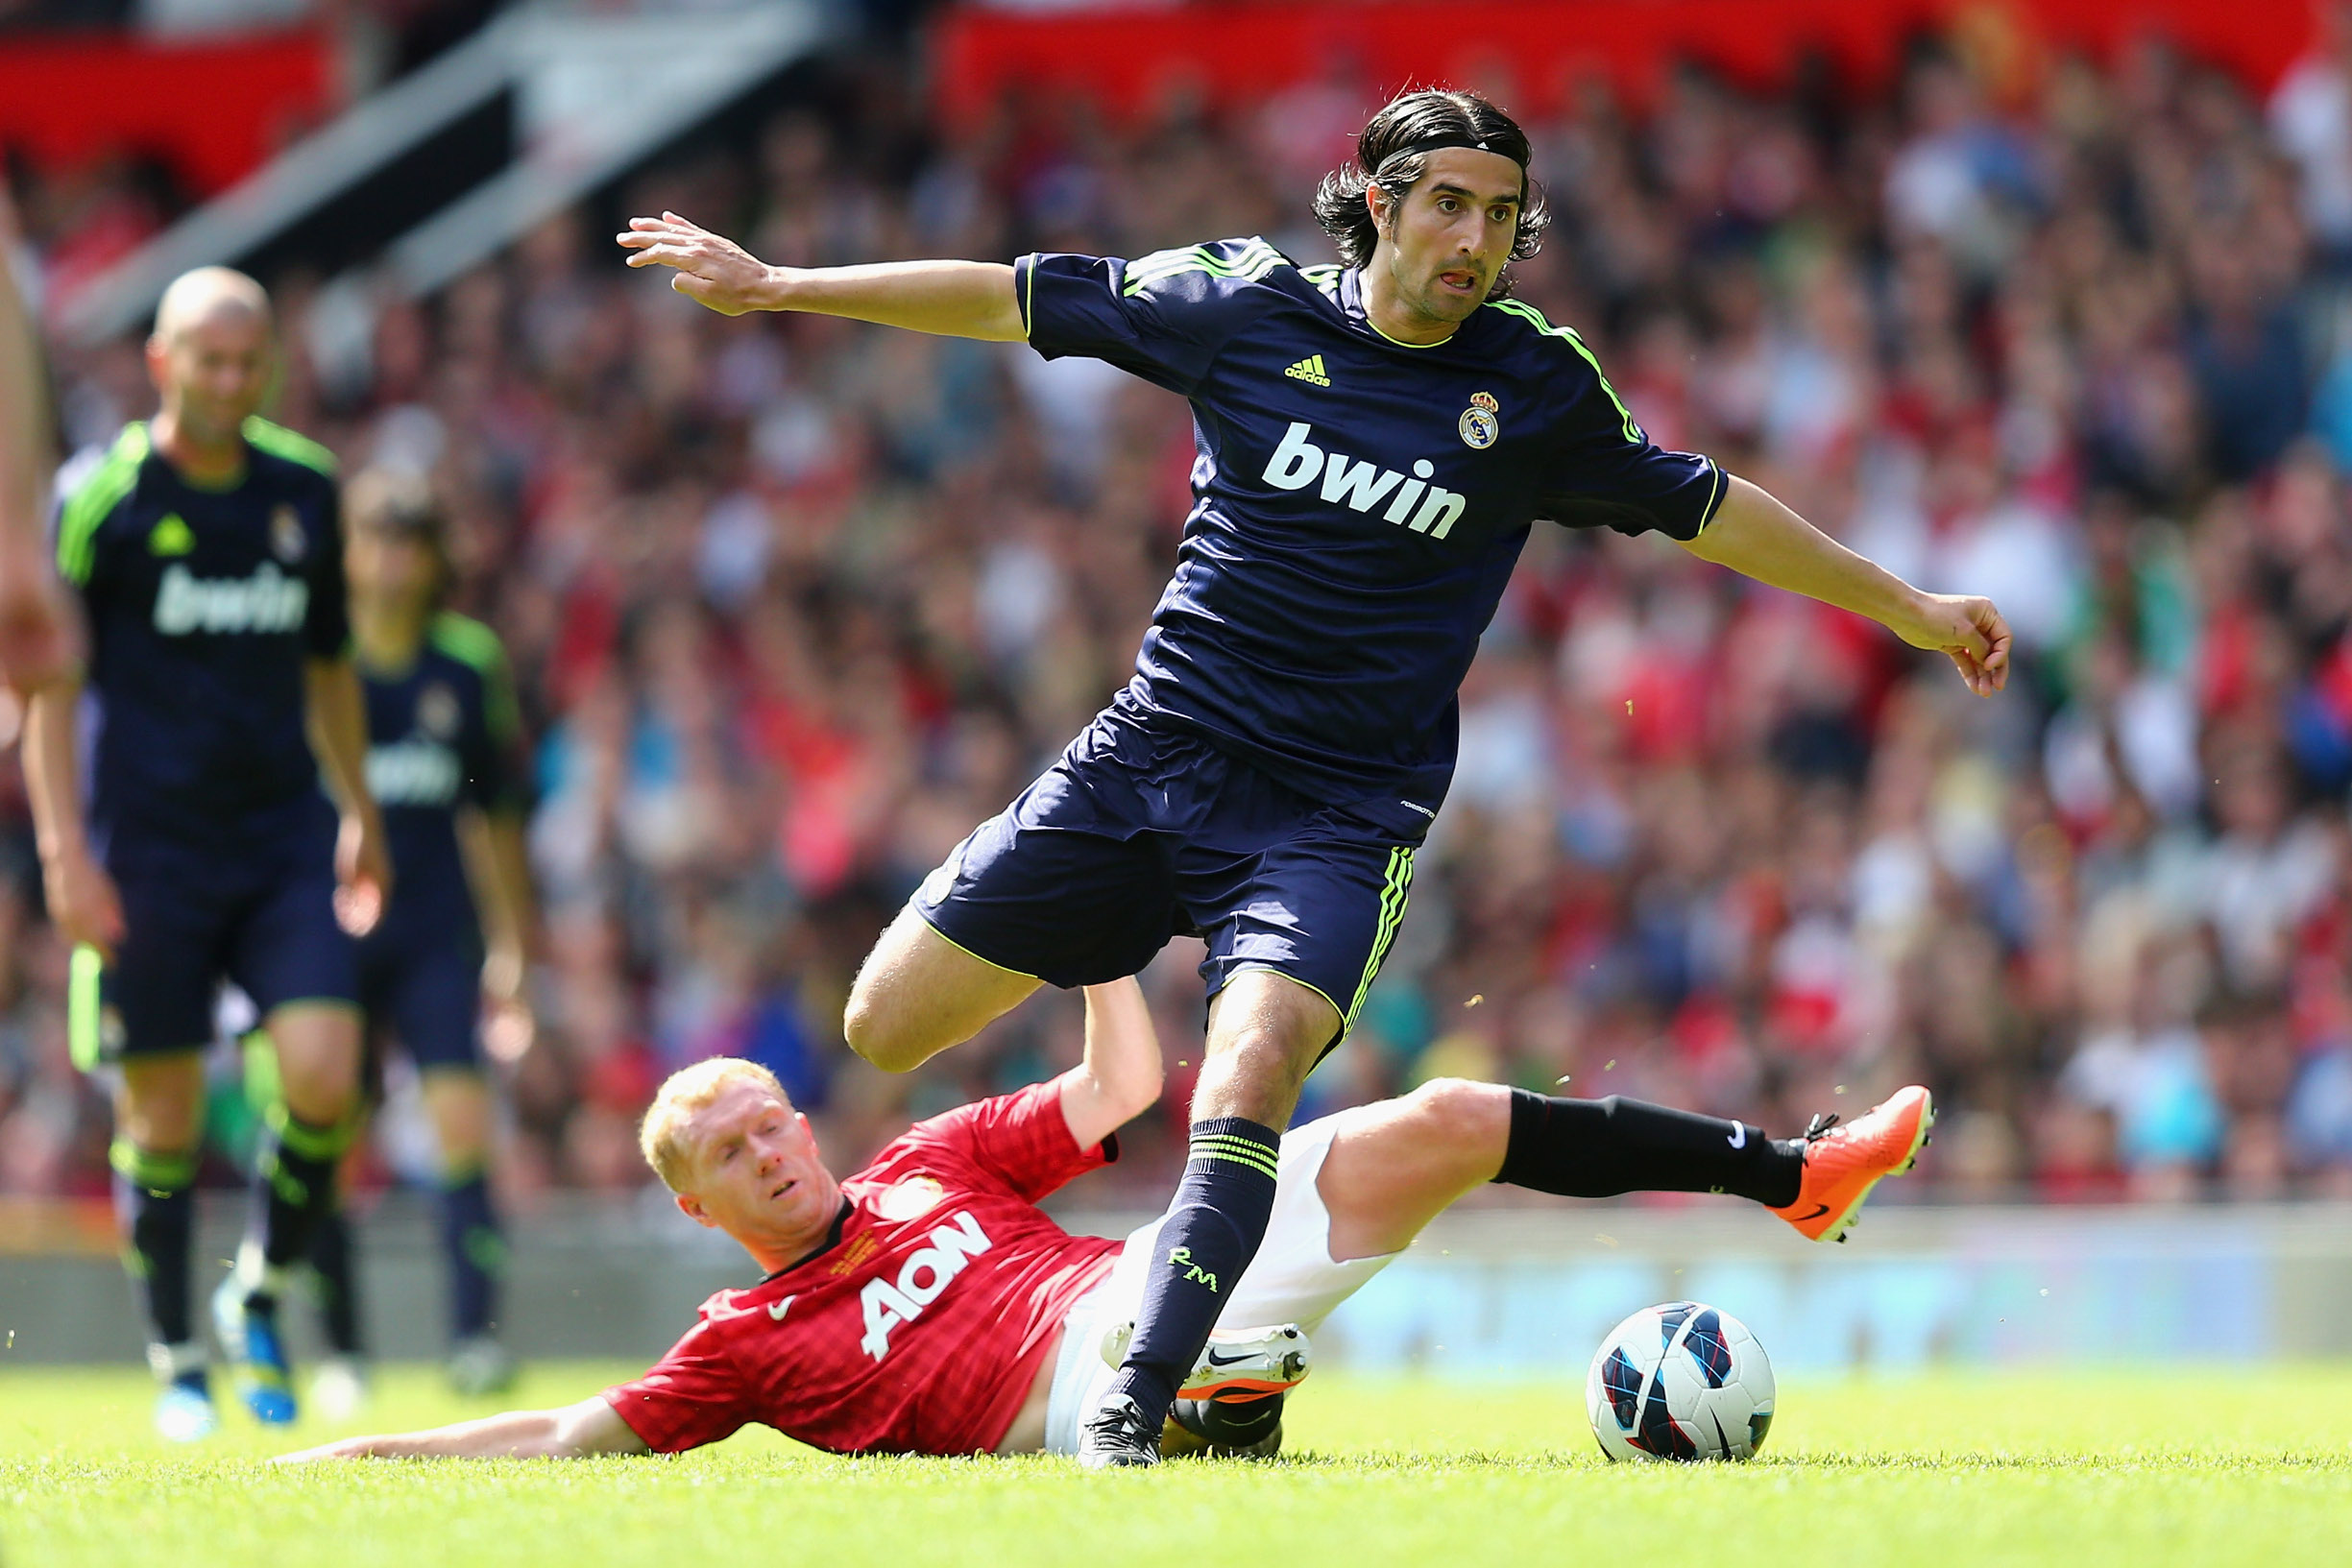 MANCHESTER, ENGLAND - JUNE 02:  Paul Scholes of Manchester United slide tackles Ruben De La Red of Real Madrid during the charity match between Manchester United Legends and Real Madrid Legends at Old Trafford on June 2, 2013 in Manchester, England.  (Photo by Clive Mason/Getty Images)